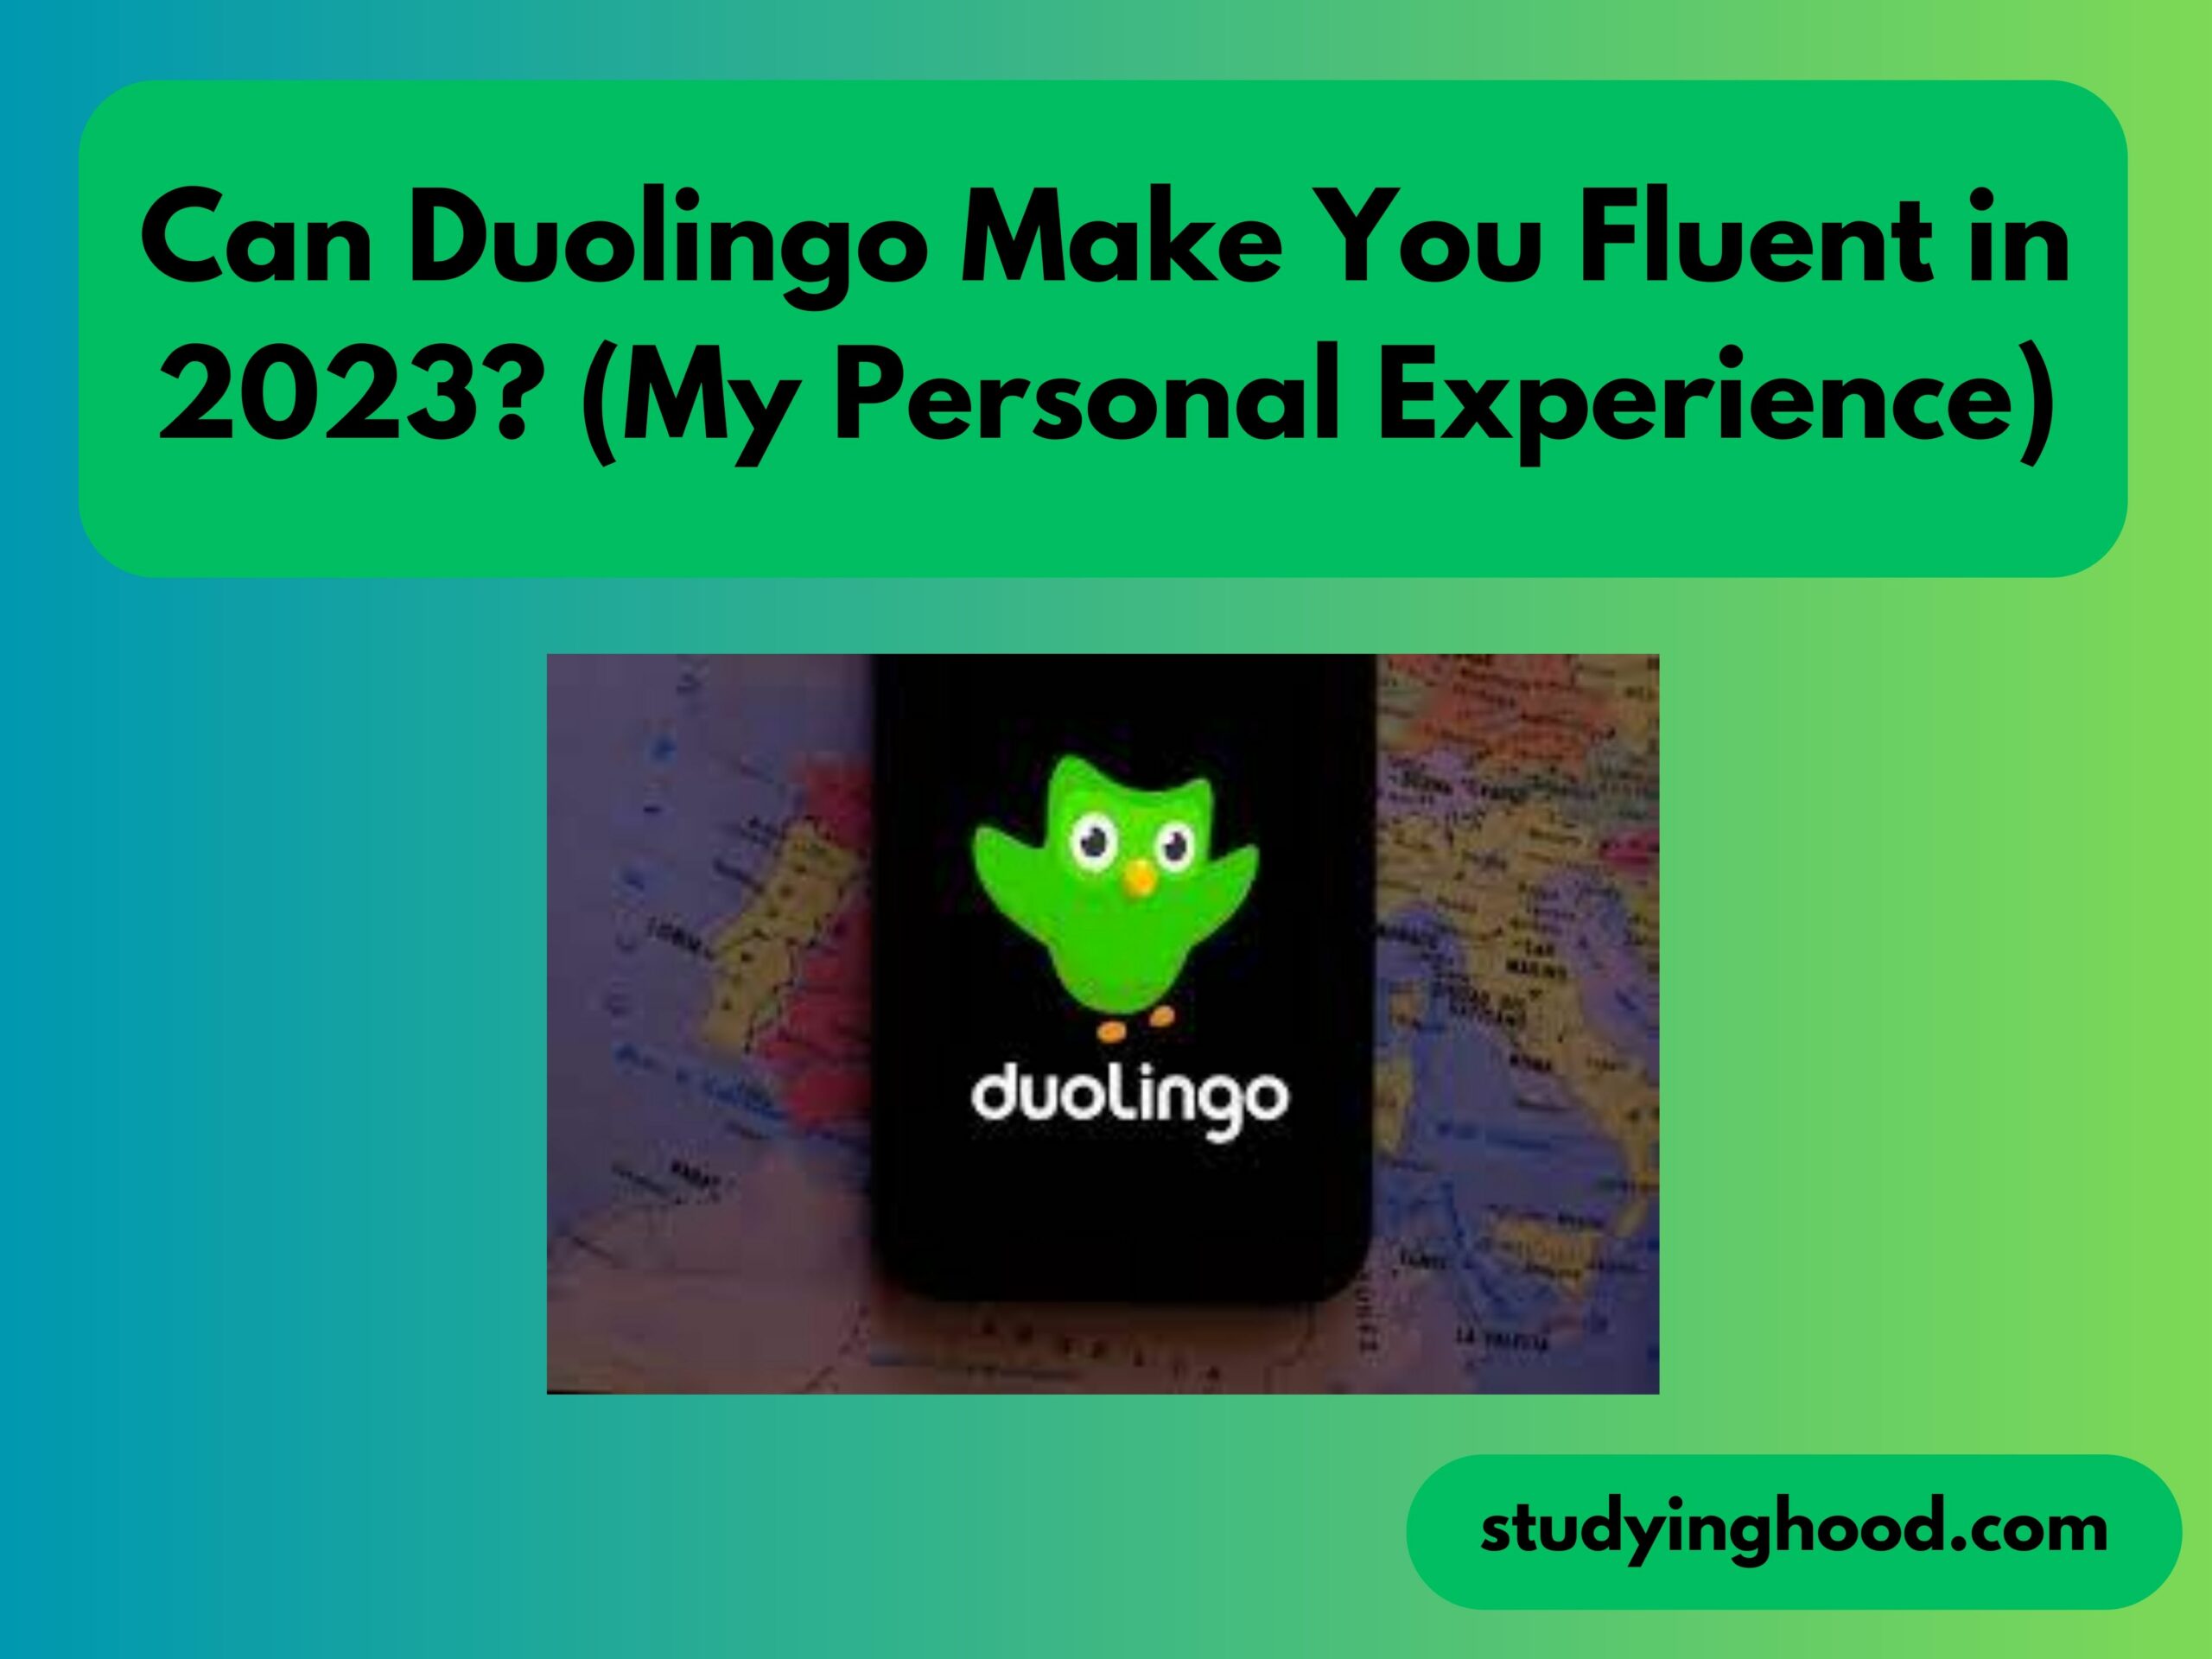 Can Duolingo Make You Fluent in 2023 (My Personal Experience)